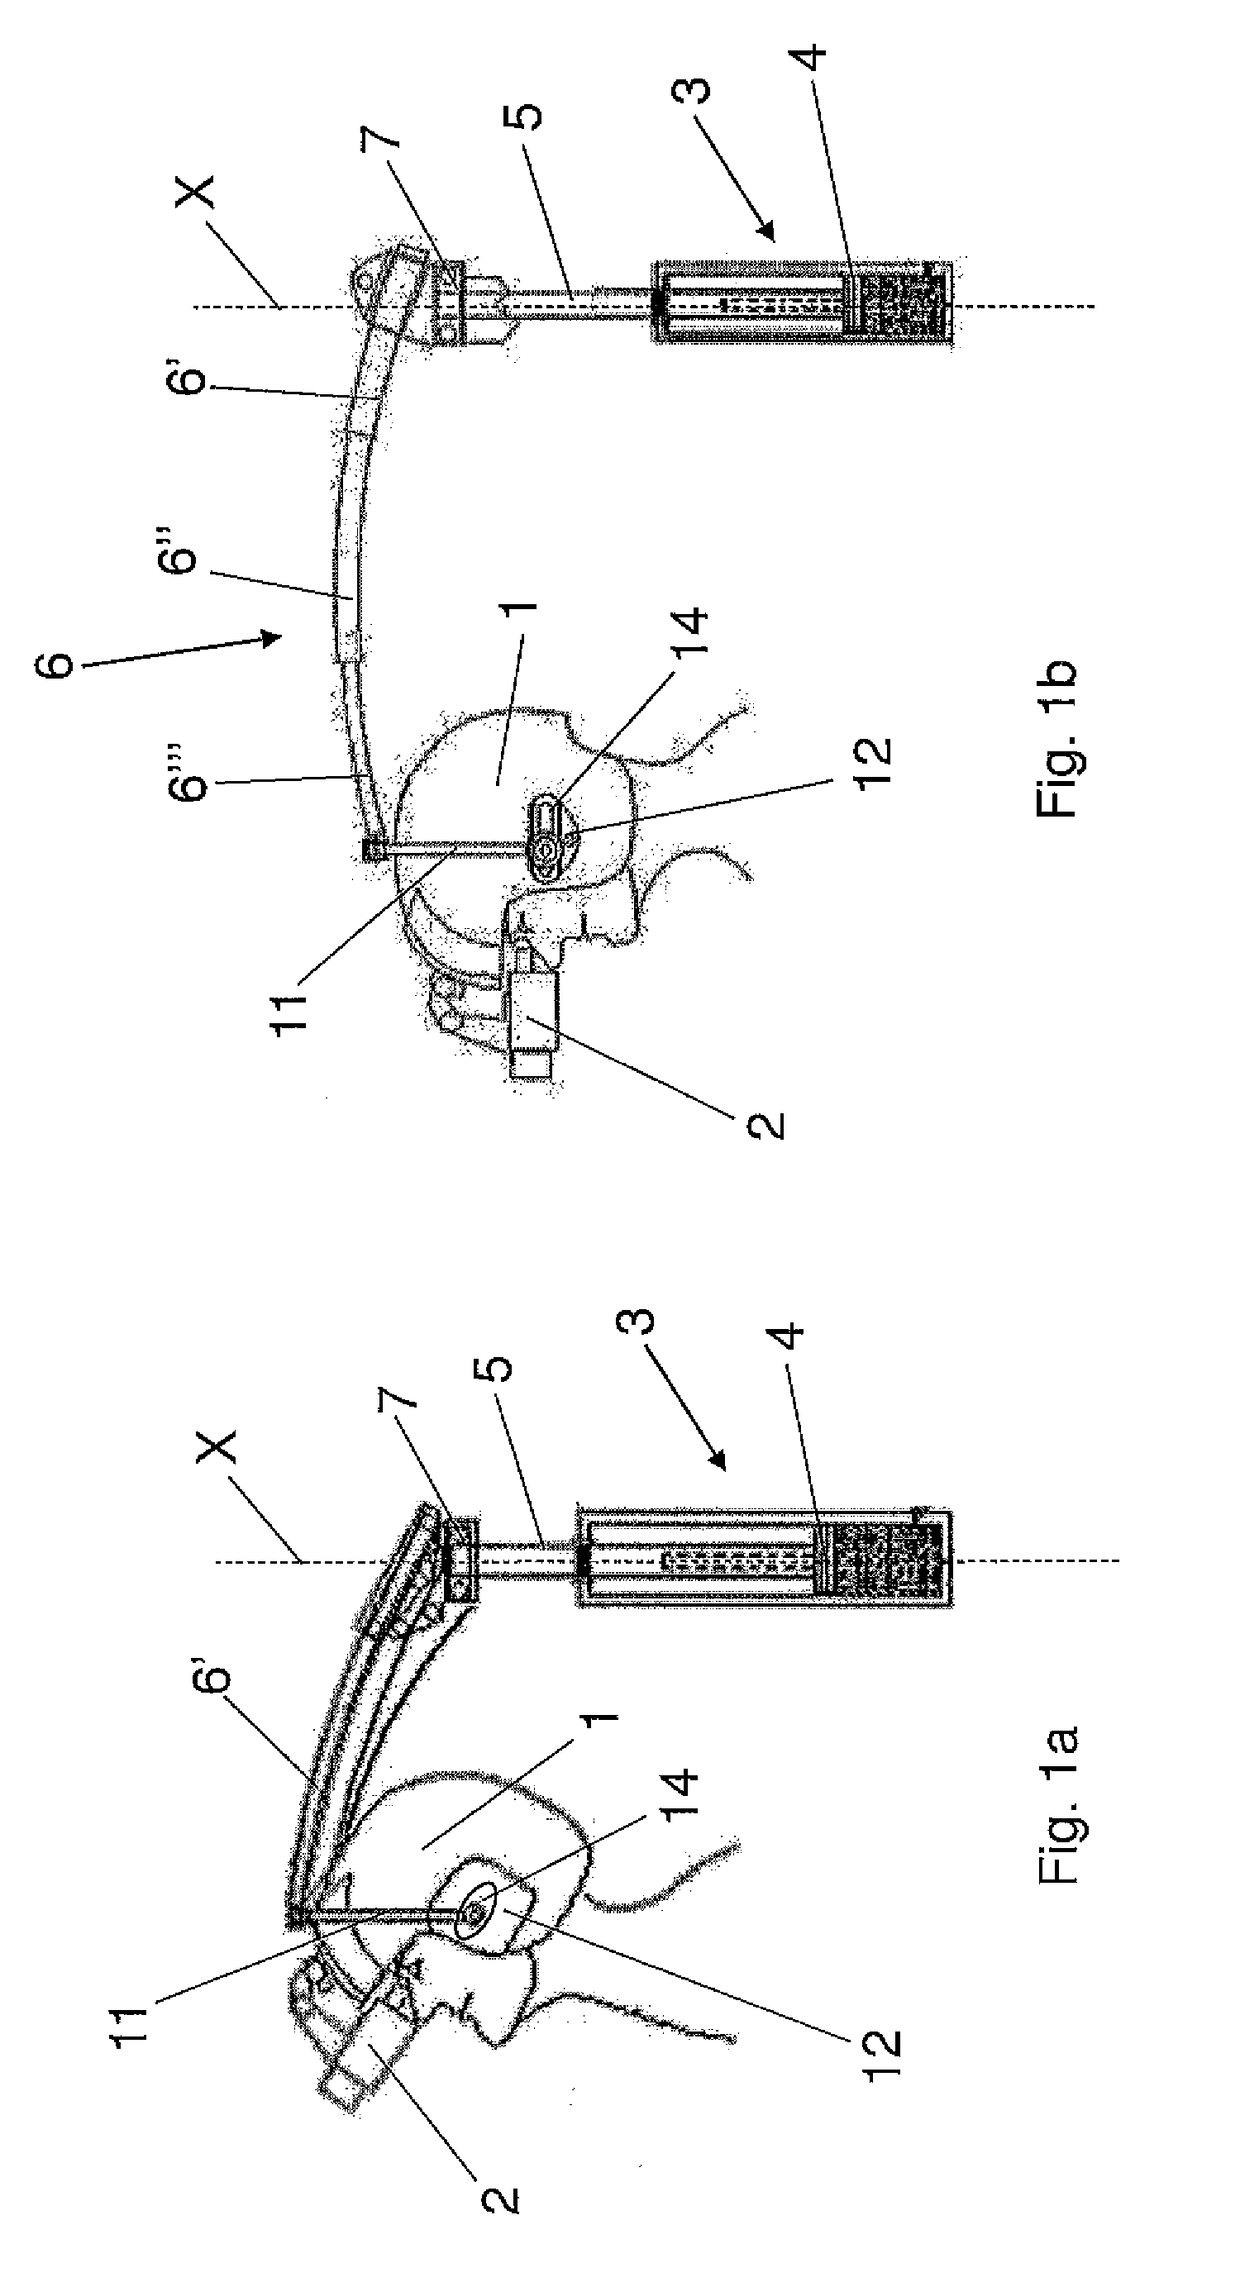 System for supporting the head-helmet unit of a passenger inside a vehicle